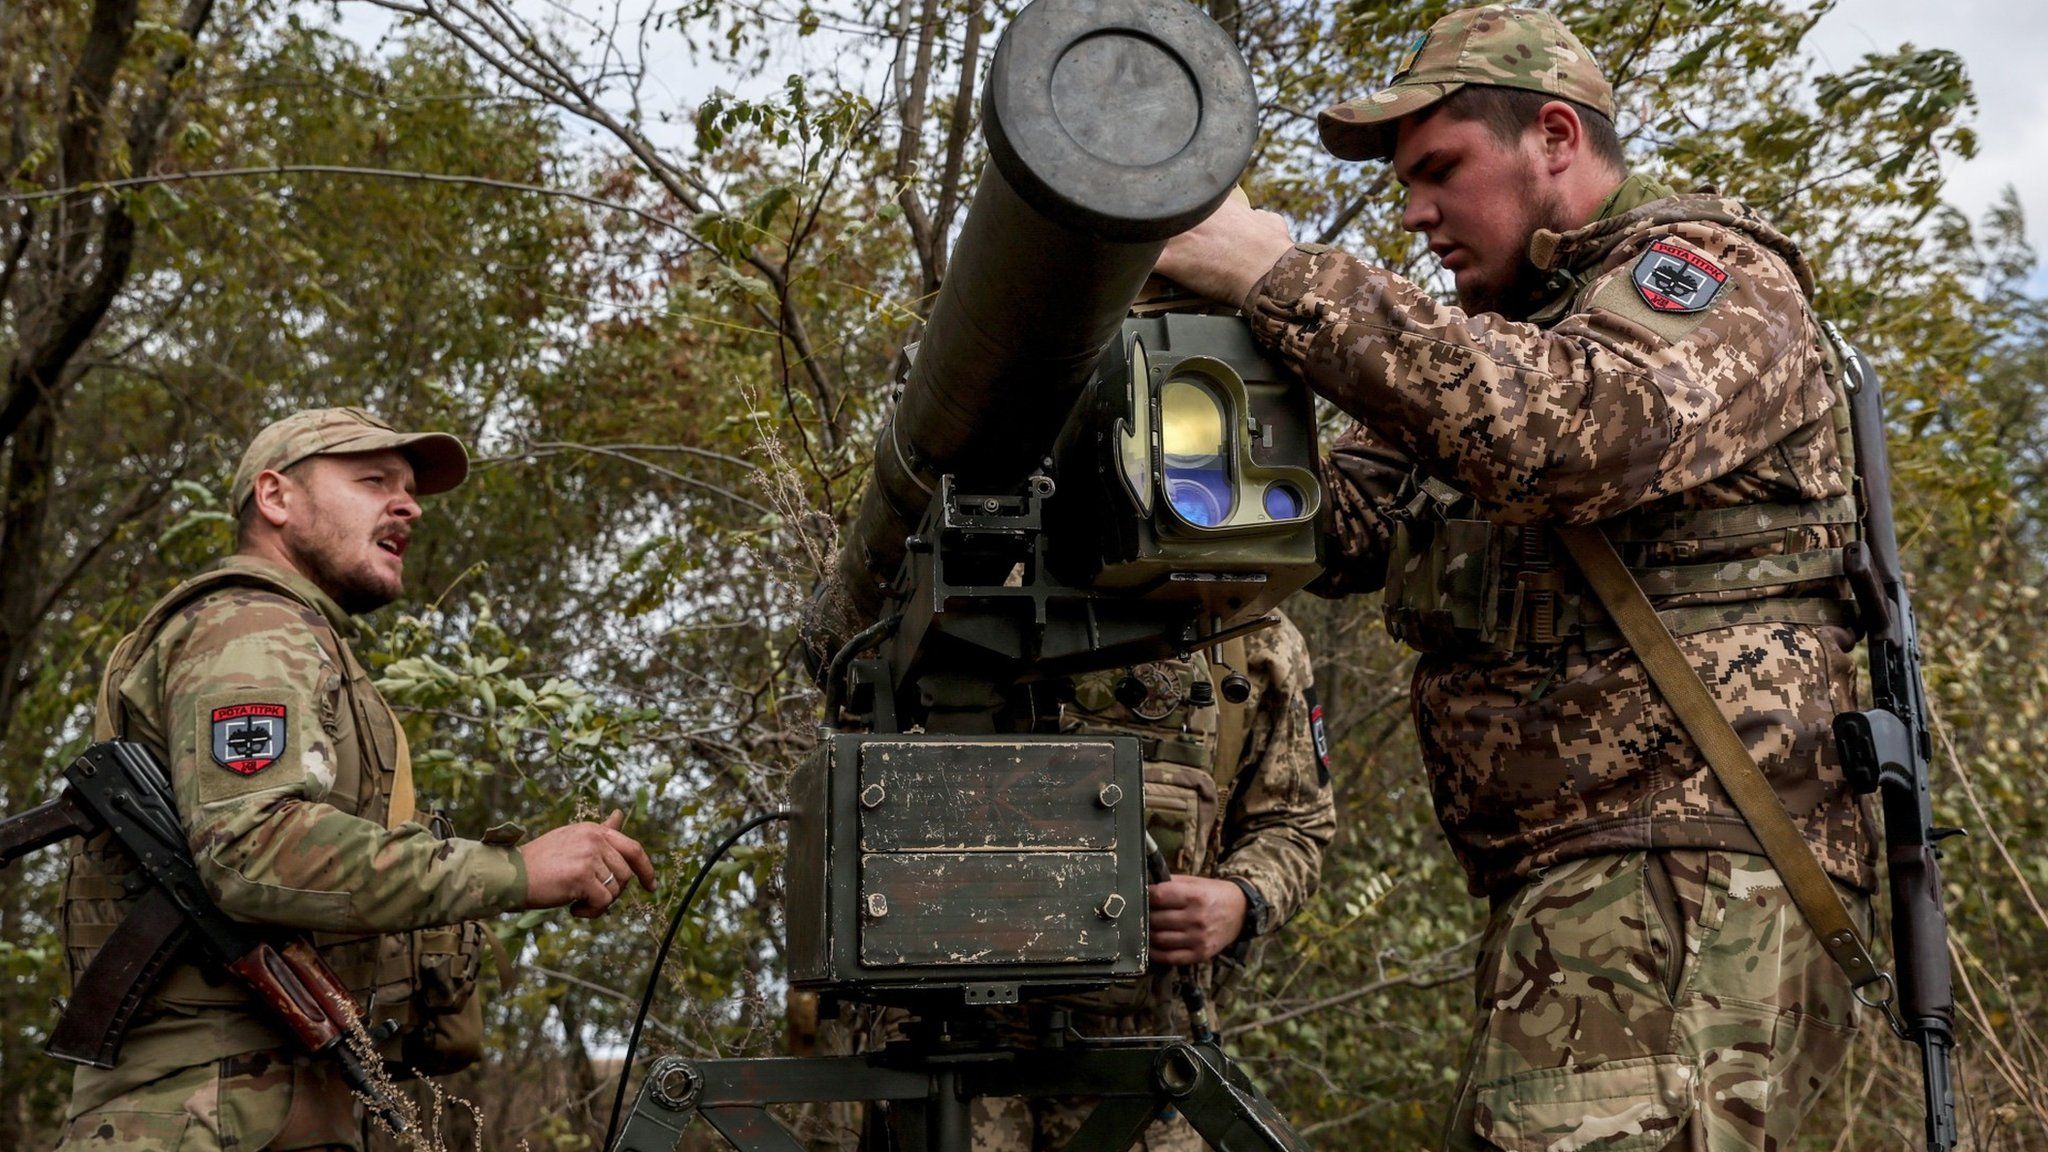 Ukrainian servicemen install a 'Skif' anti-tank guided missile (ATGM) system at an undisclosed location in the Zaporizhia region